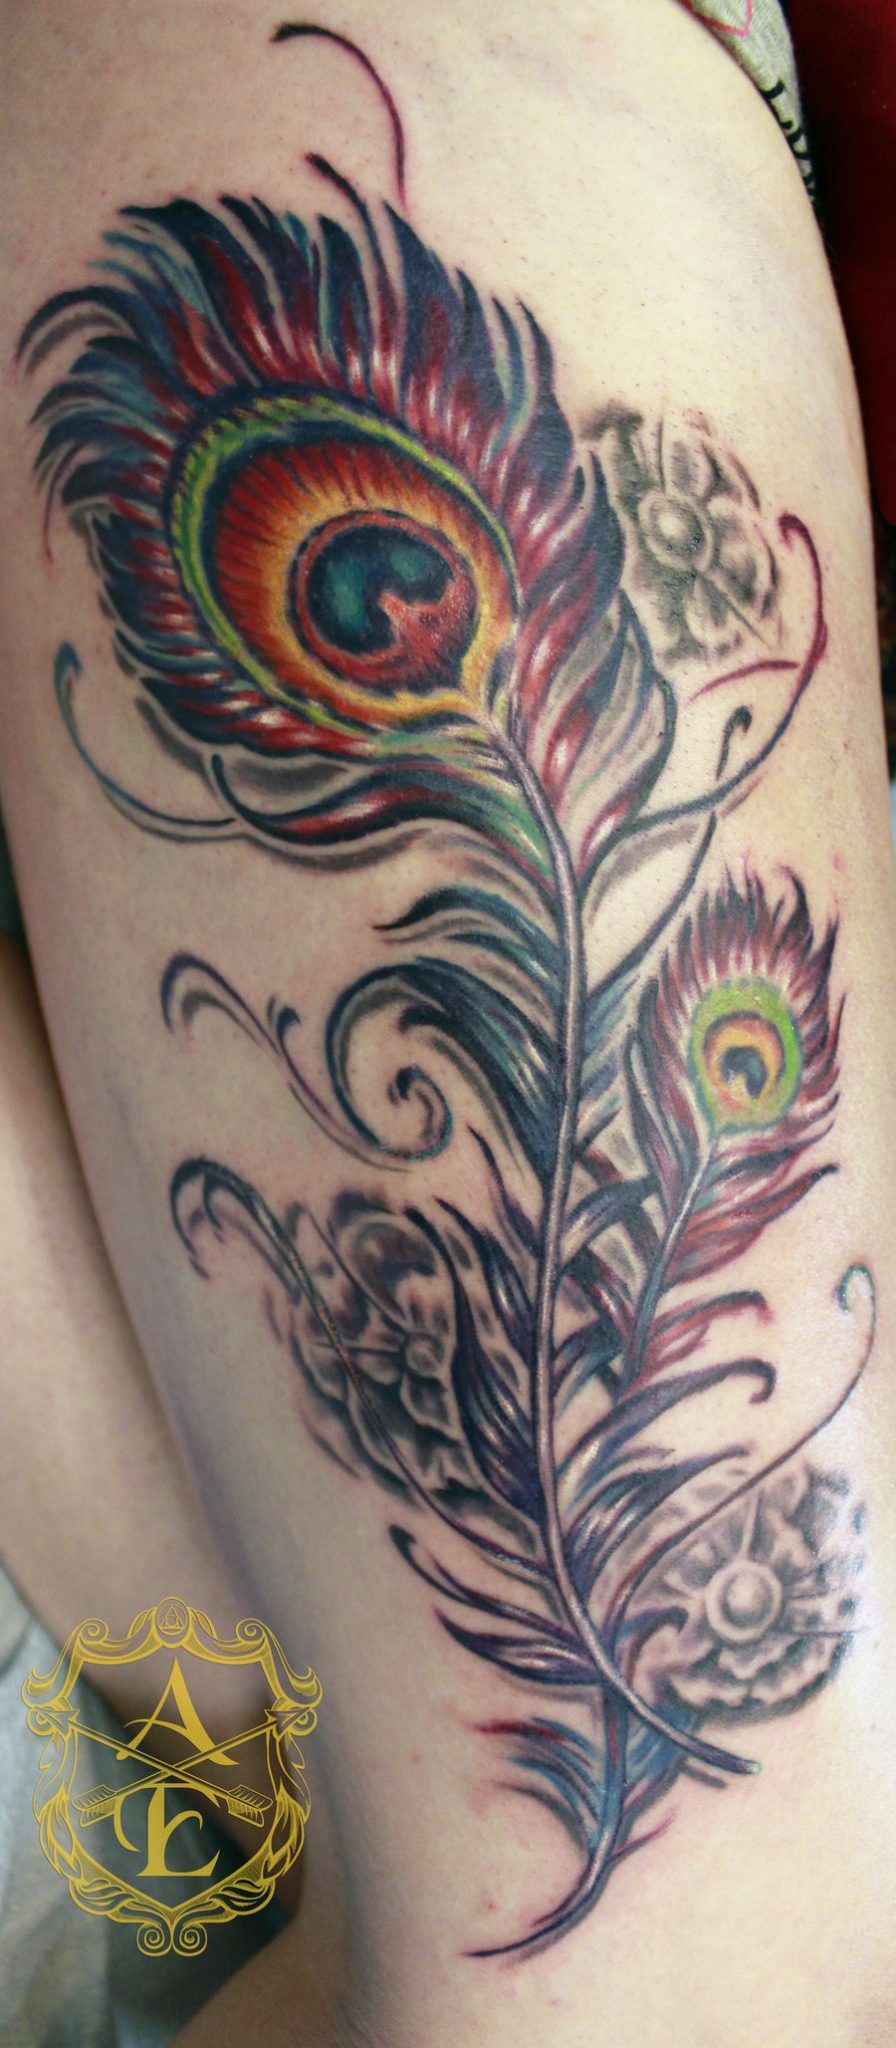 Tattoos Of Feathers Peacock Feather Foot -   Peacock tattoo Ideas